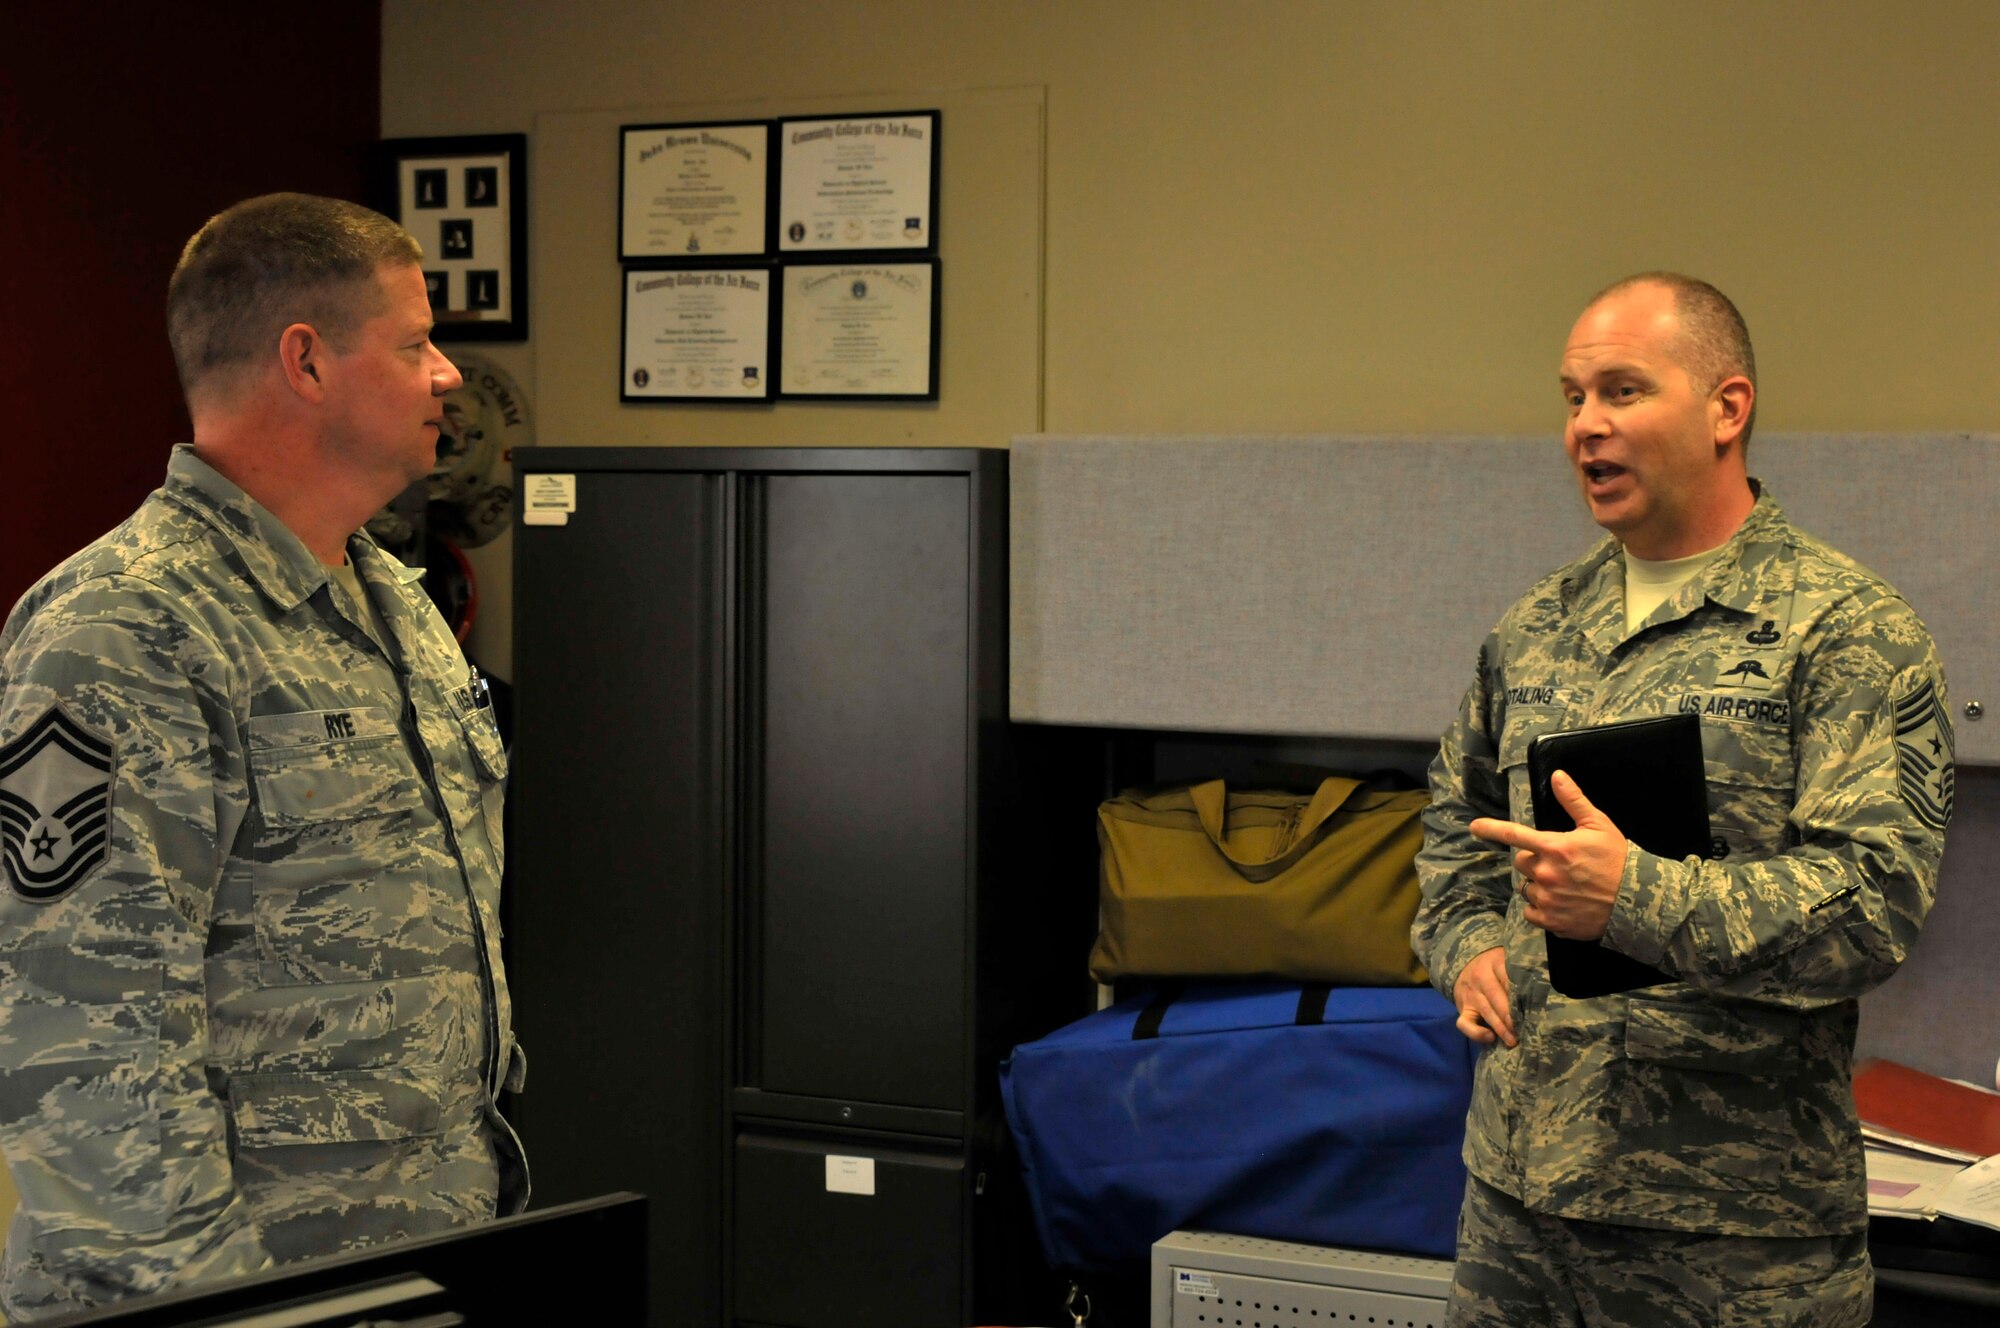 Air National Guard Command Chief Master Sgt. James W. Hotaling speaks with Senior Master Sgt. Damon Rye at Ebbing Air National Guard Base, Fort Smith, Ark., April 5, 2014. Hotaling visited with many different Airmen during his time at the 188th Fighter Wing. He also met with wing leadership before touring the unit’s facilities. (U.S. Air National Guard photo by Airman 1st Class Cody Martin/Released)